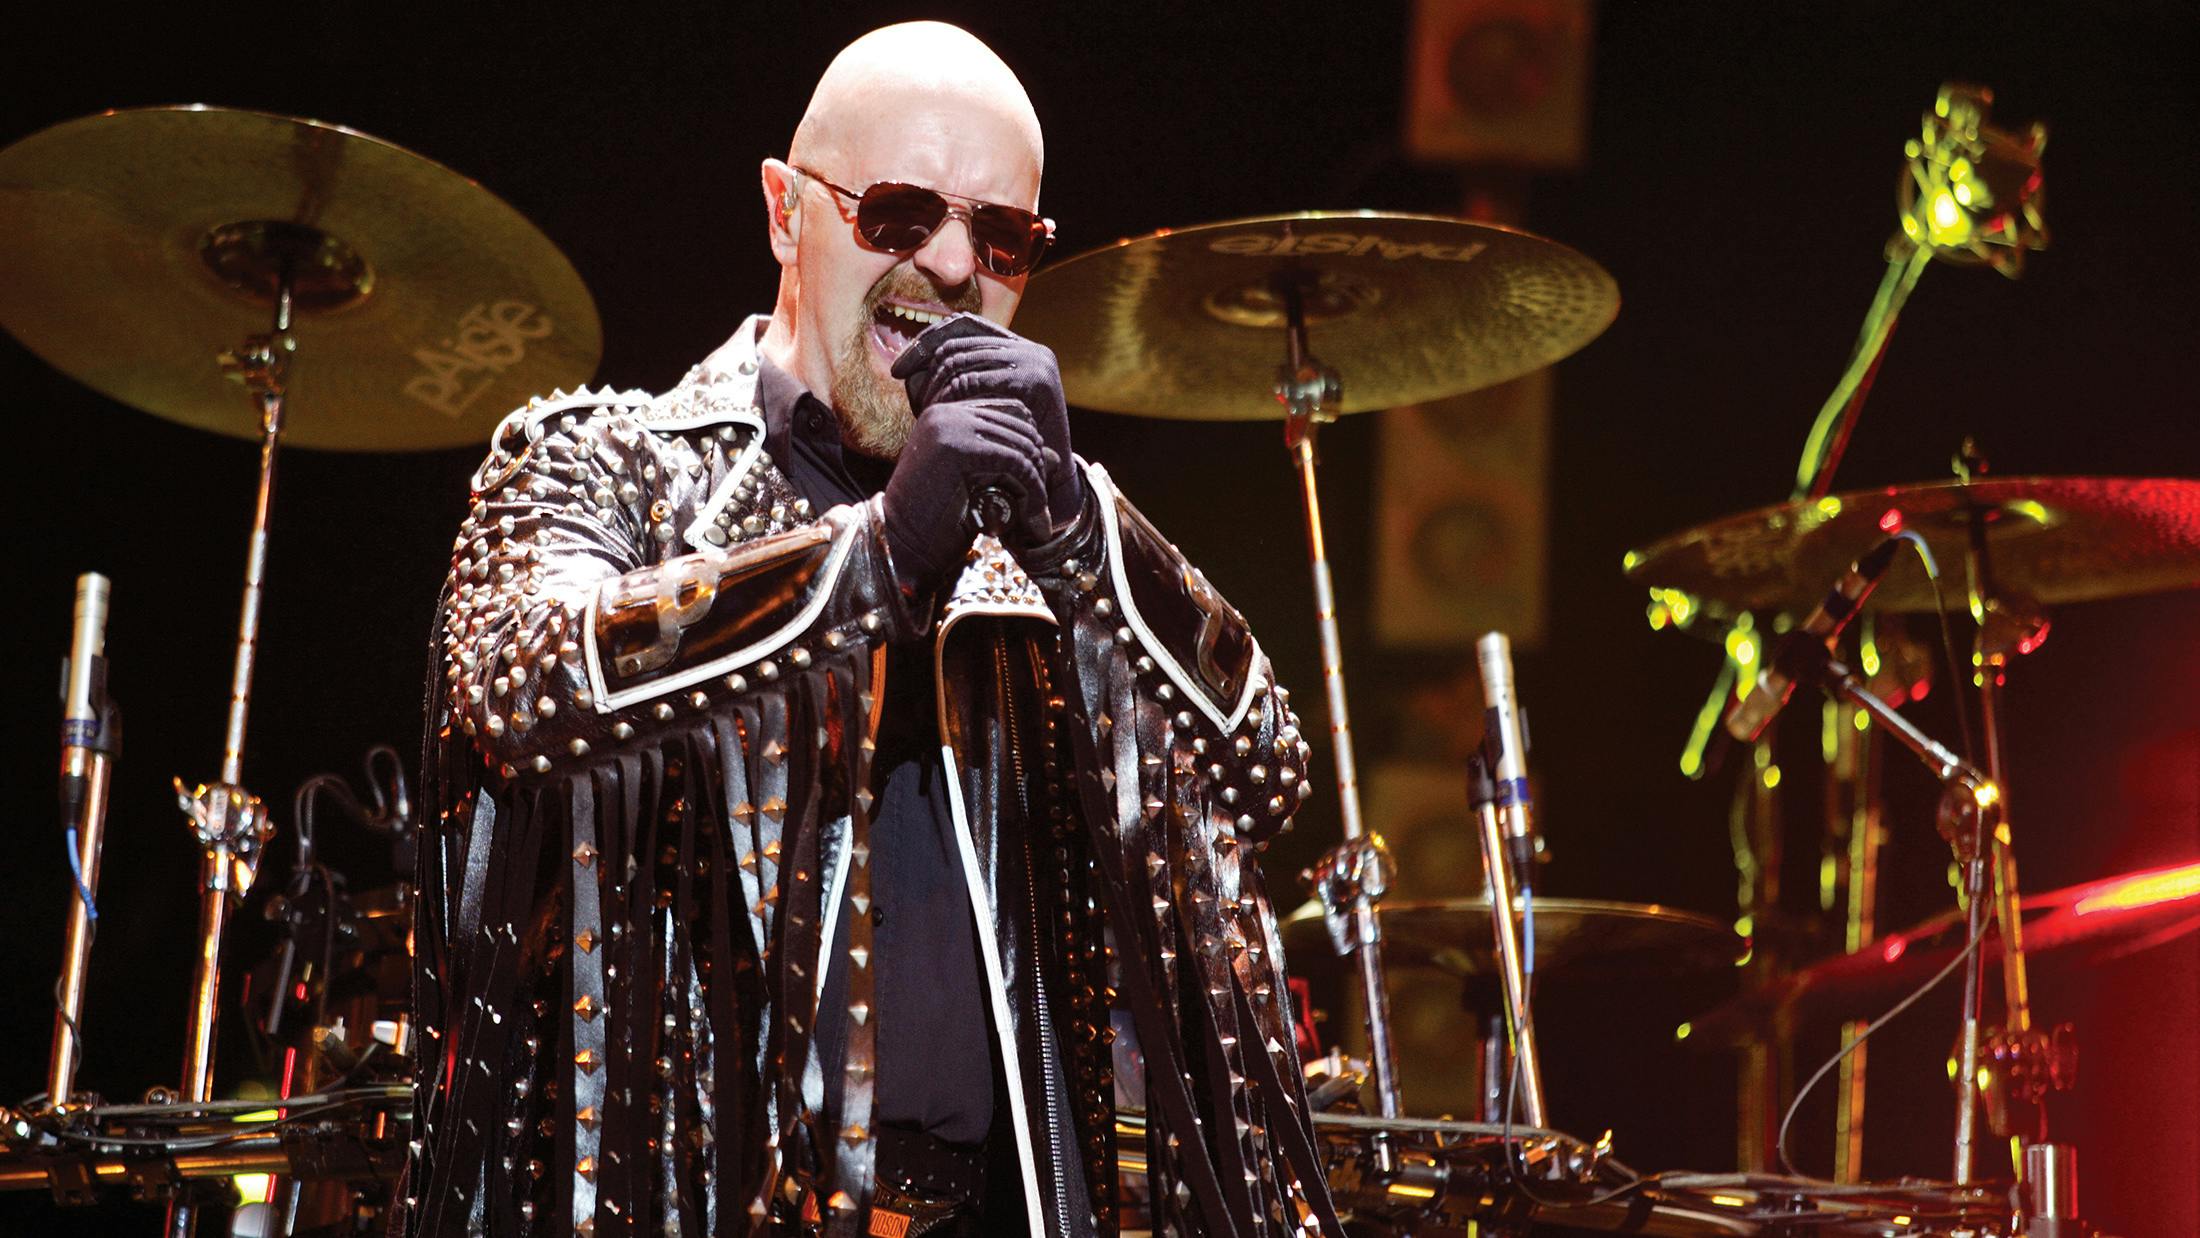 That Time Rob Halford Stole An Ornament From John Lennon